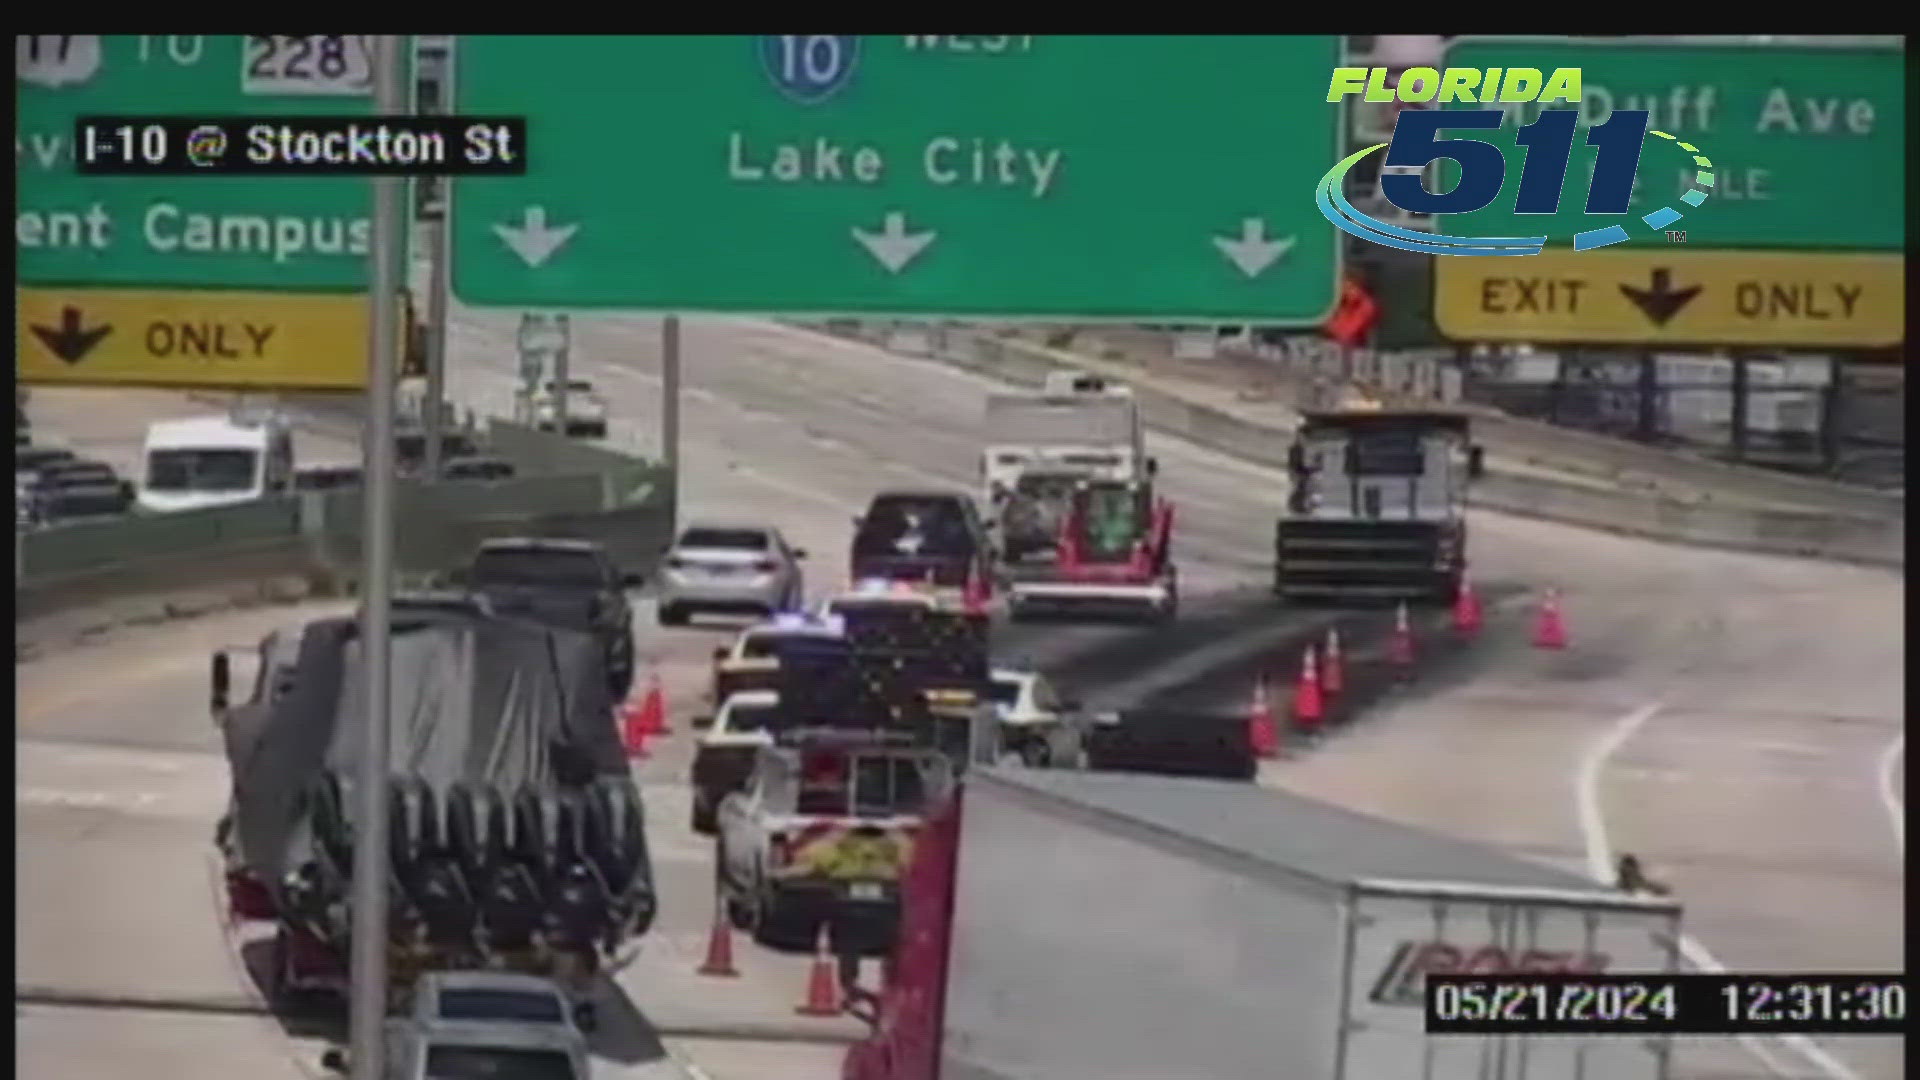 Three lanes of I-10 are currently blocked as crews work to clean up the debris.